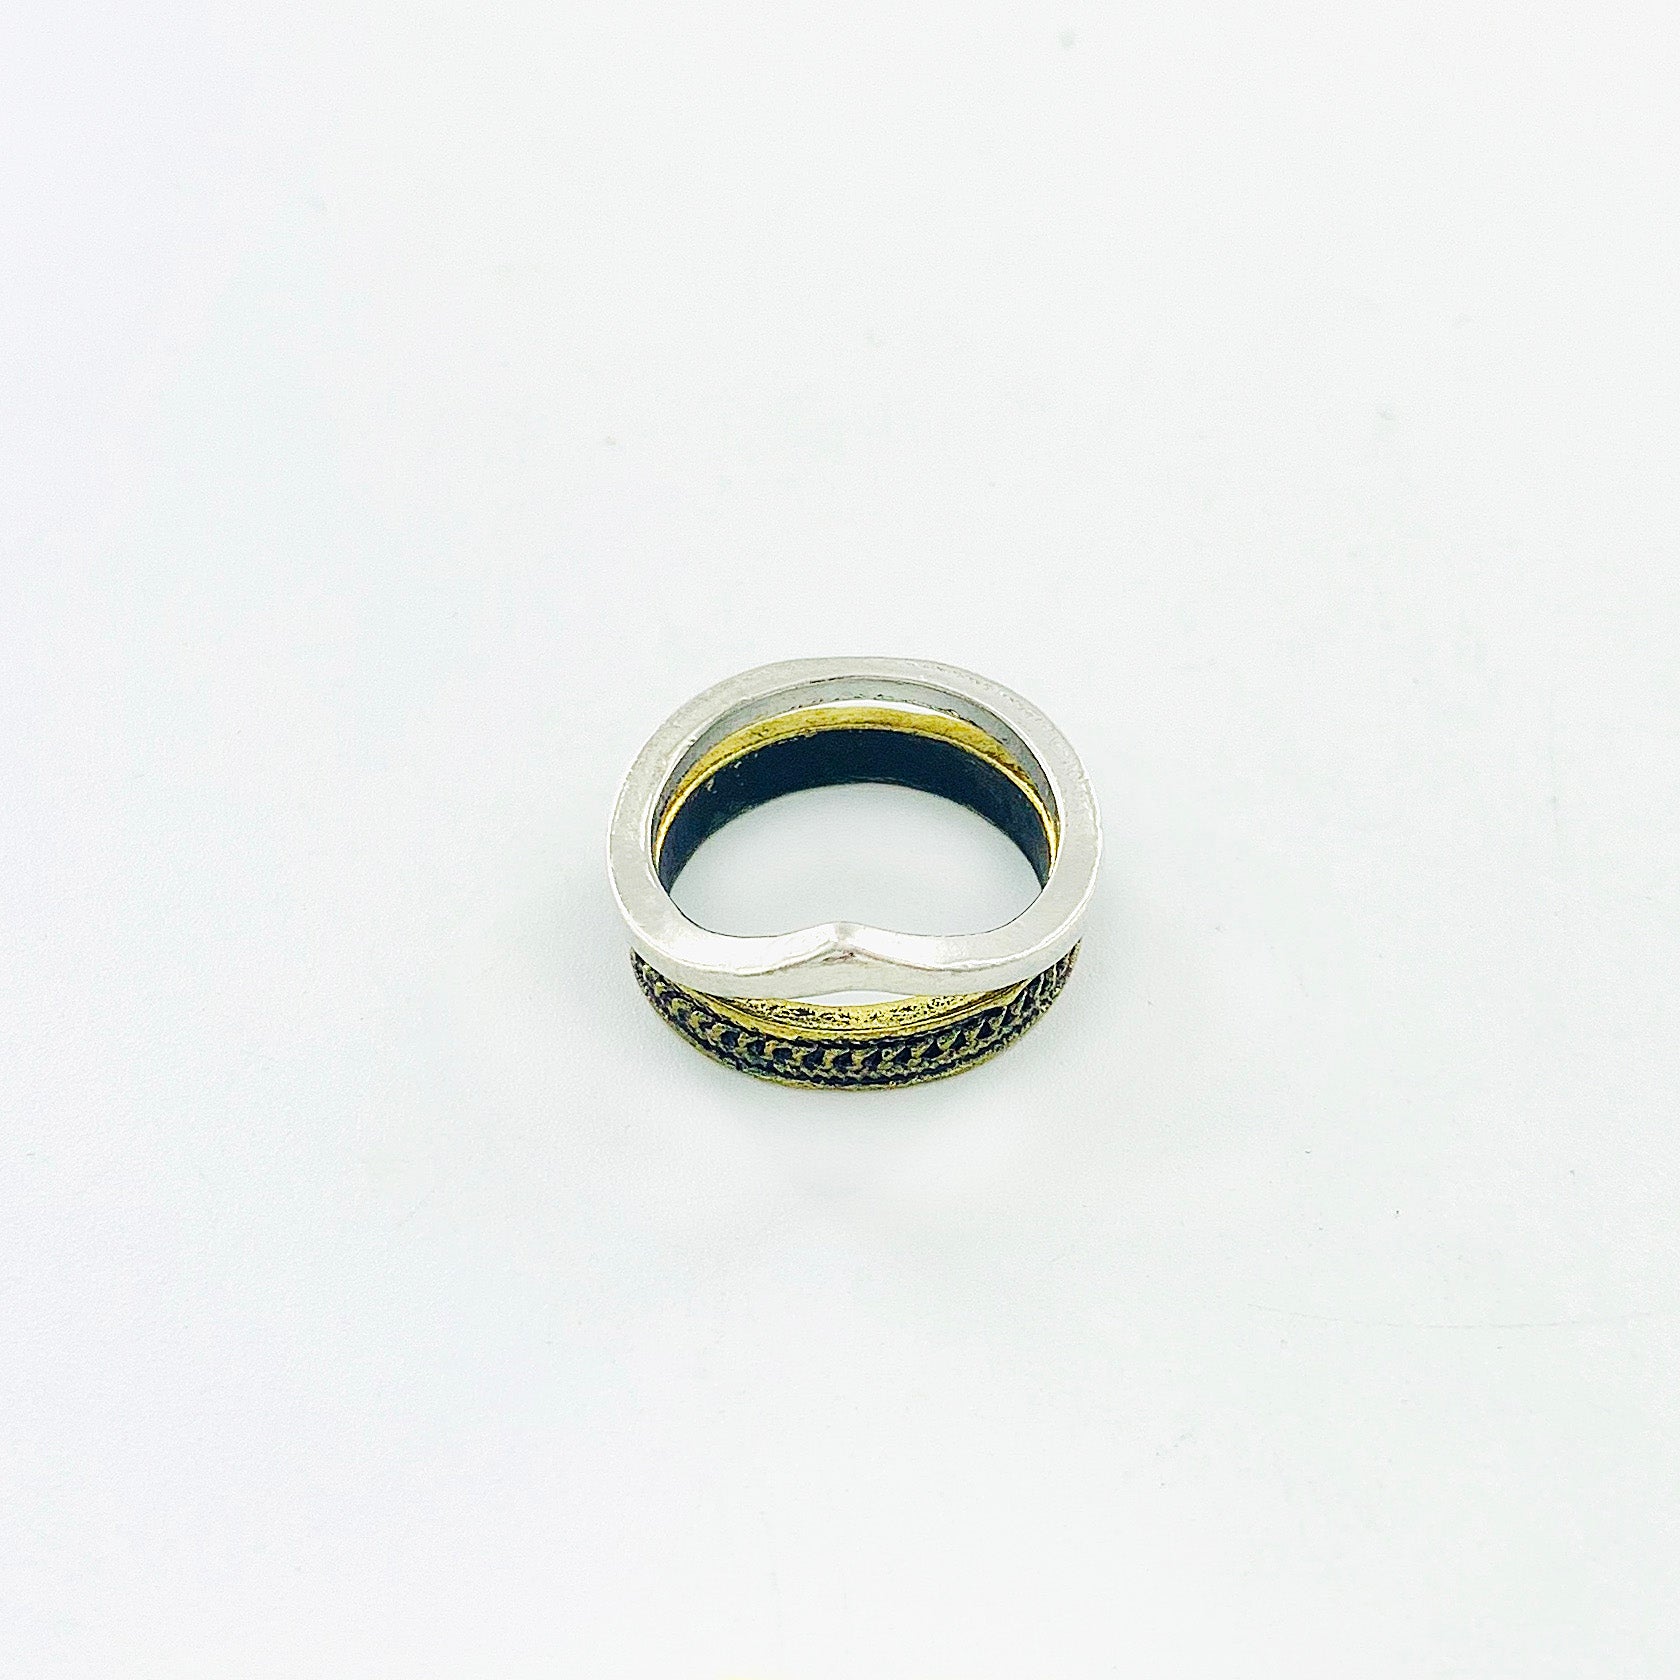 Silver V ring with rustic gold ring